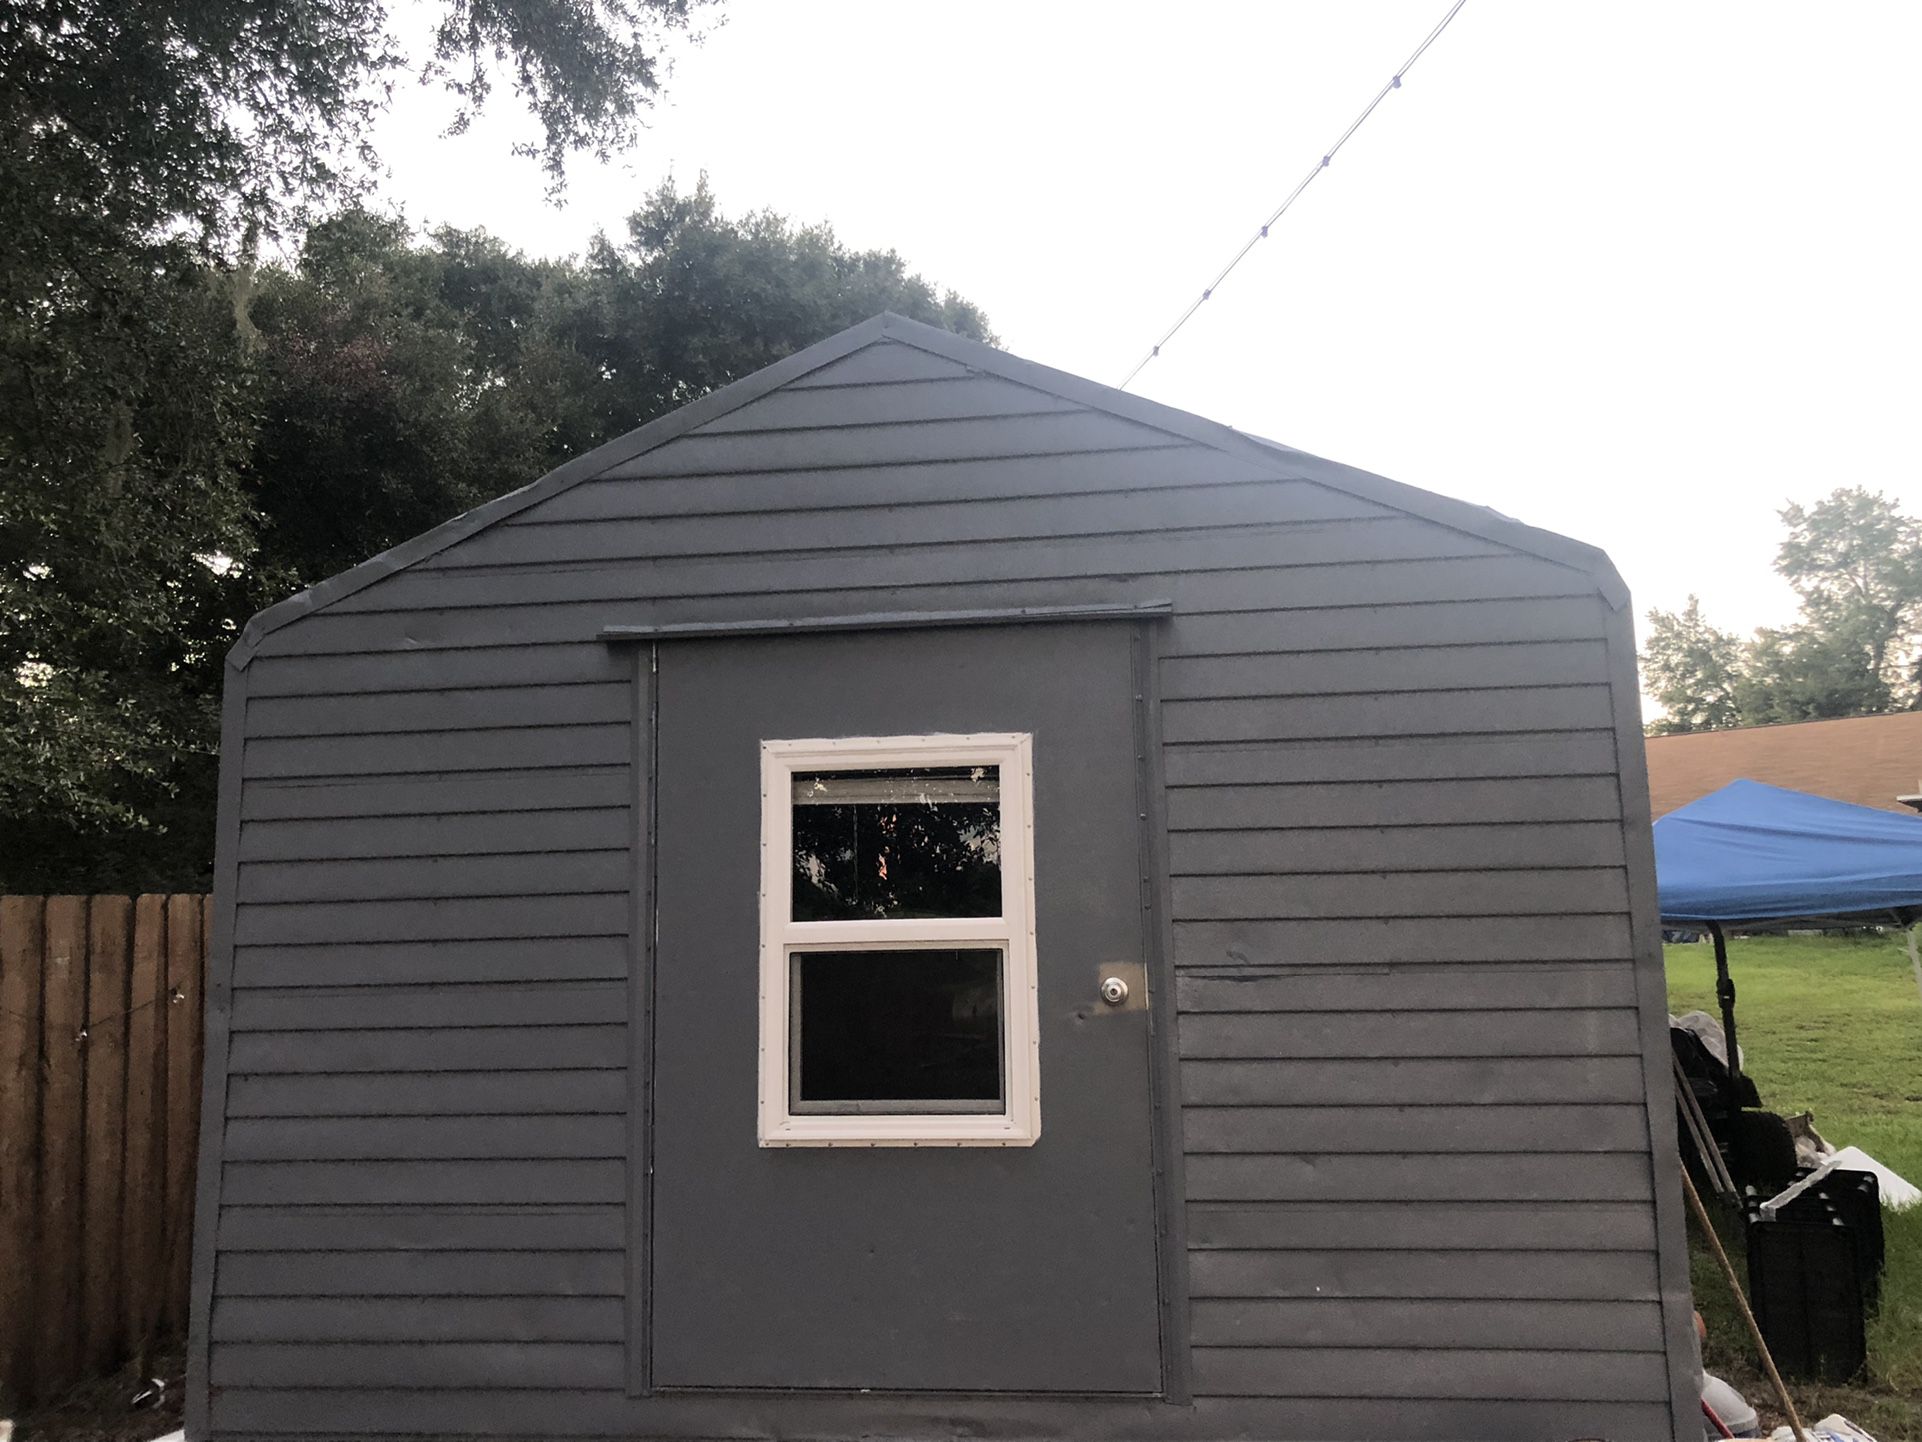  Shed 12x24 Studio Complete remodel 